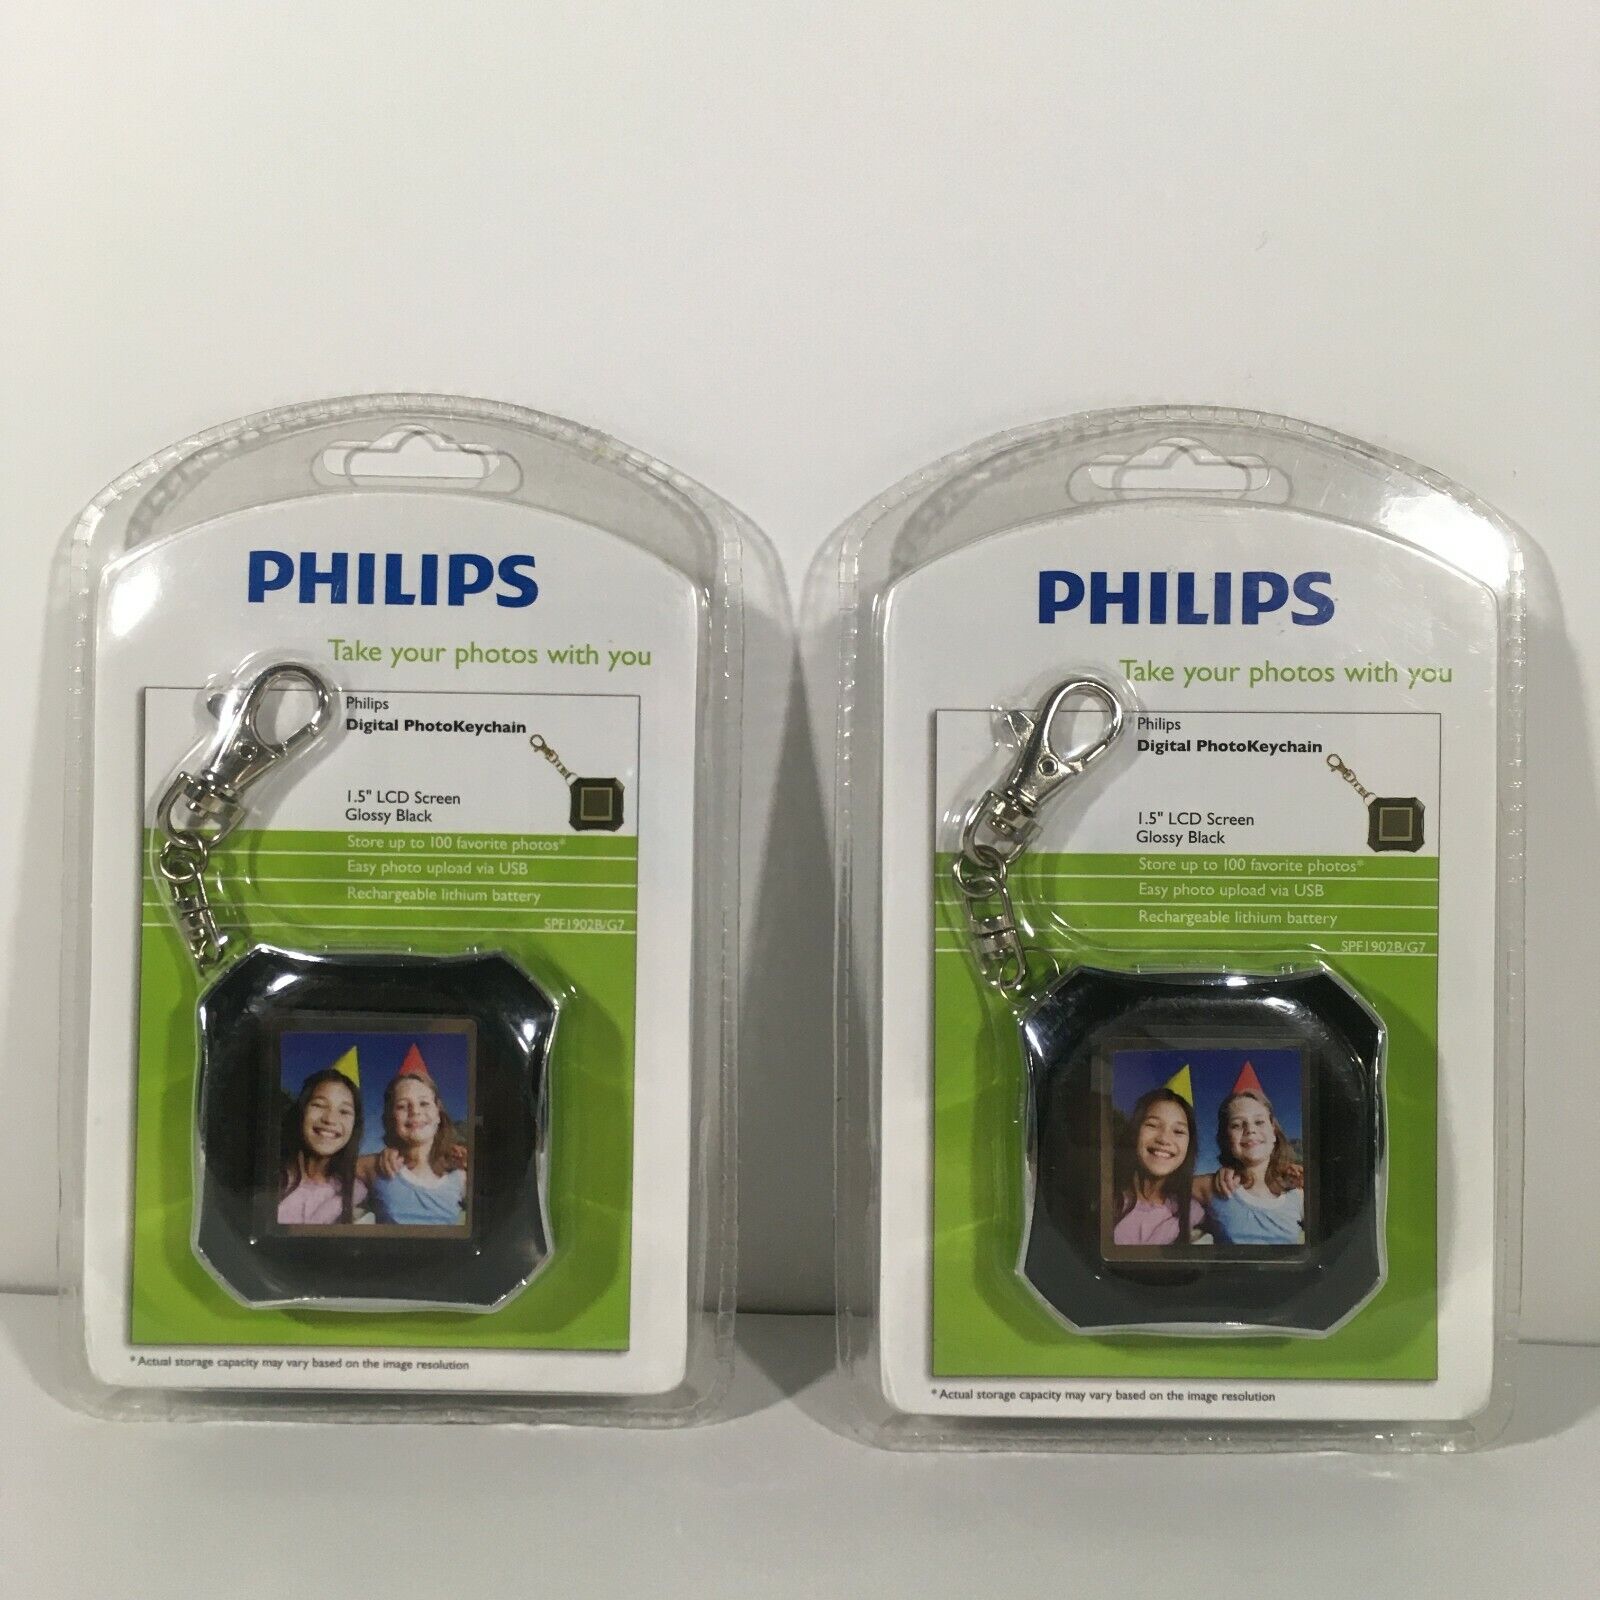 Philips Digital Photo Keychain Take Your Photos With You 1.5" LCD Screen  Philips Does Not Apply